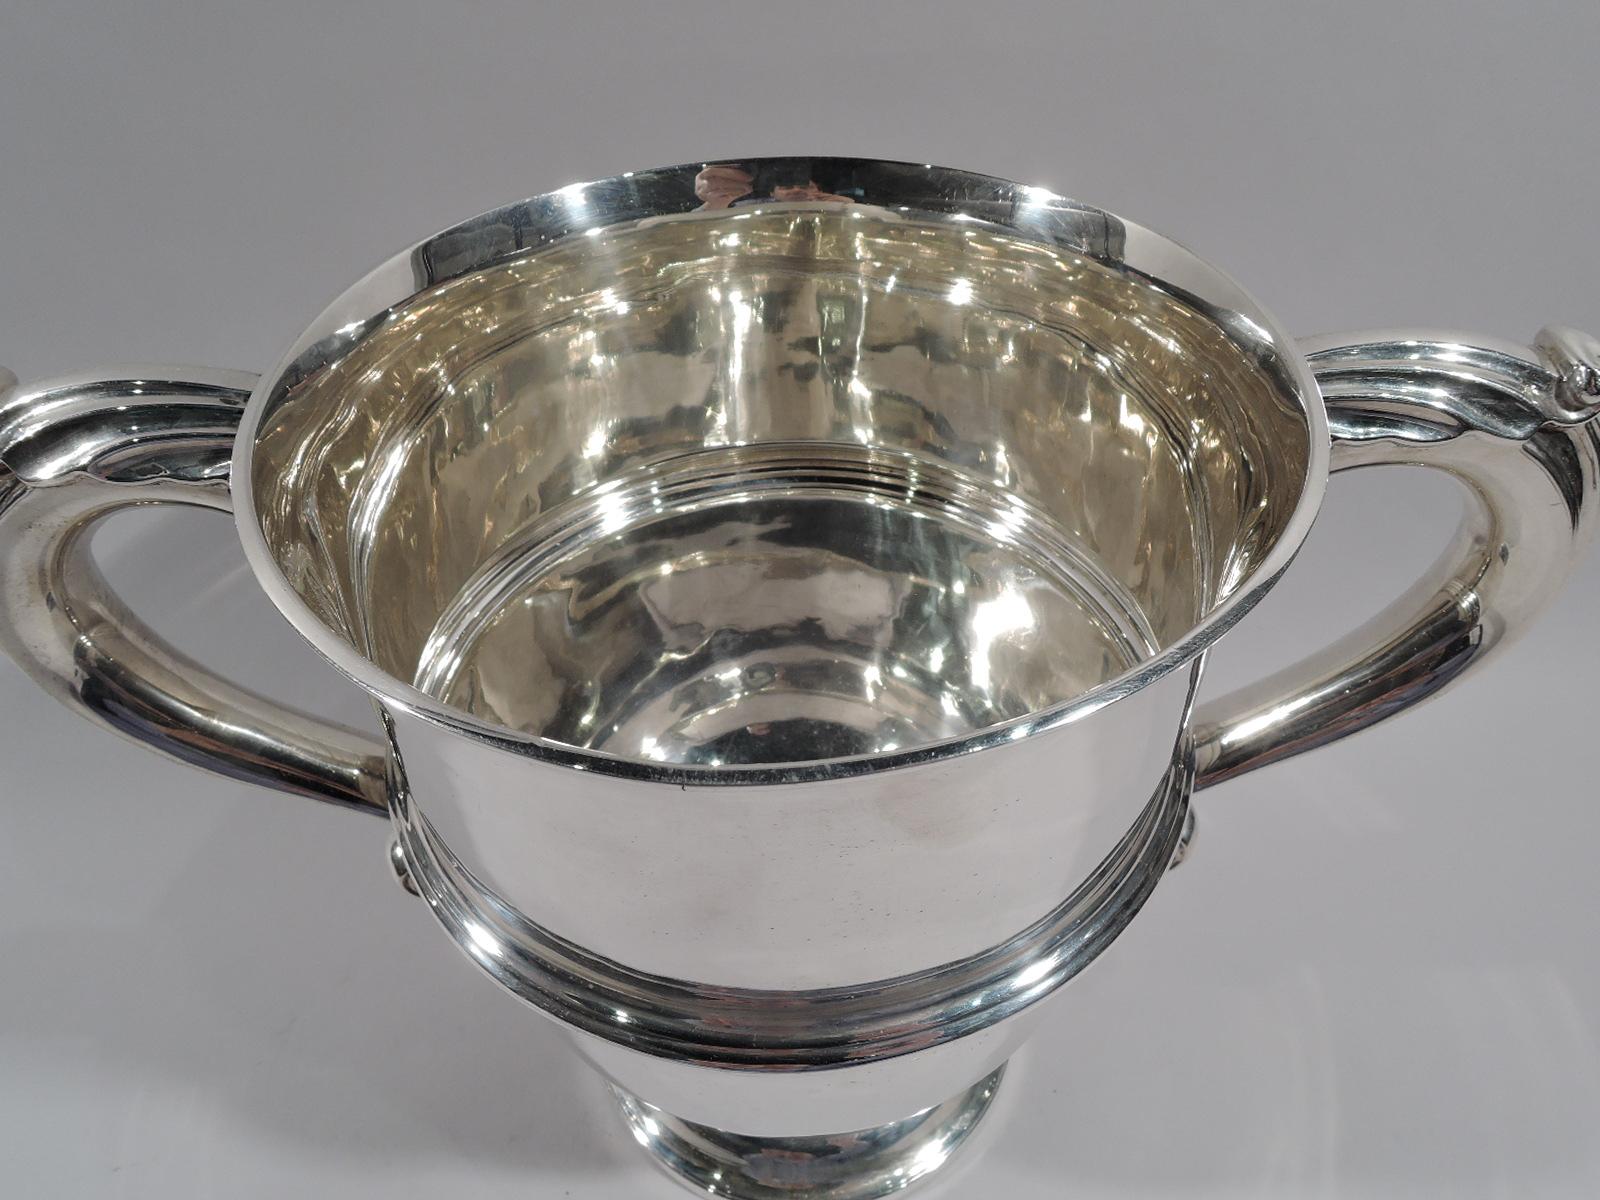 Victorian classical sterling silver urn cup. Made by Elkington in Birmingham in 1896. Girdled with leaf-capped s-scroll side handles and stepped and round foot. Capacious and traditional with lots of room for engraving. Fully marked. Heavy weight: